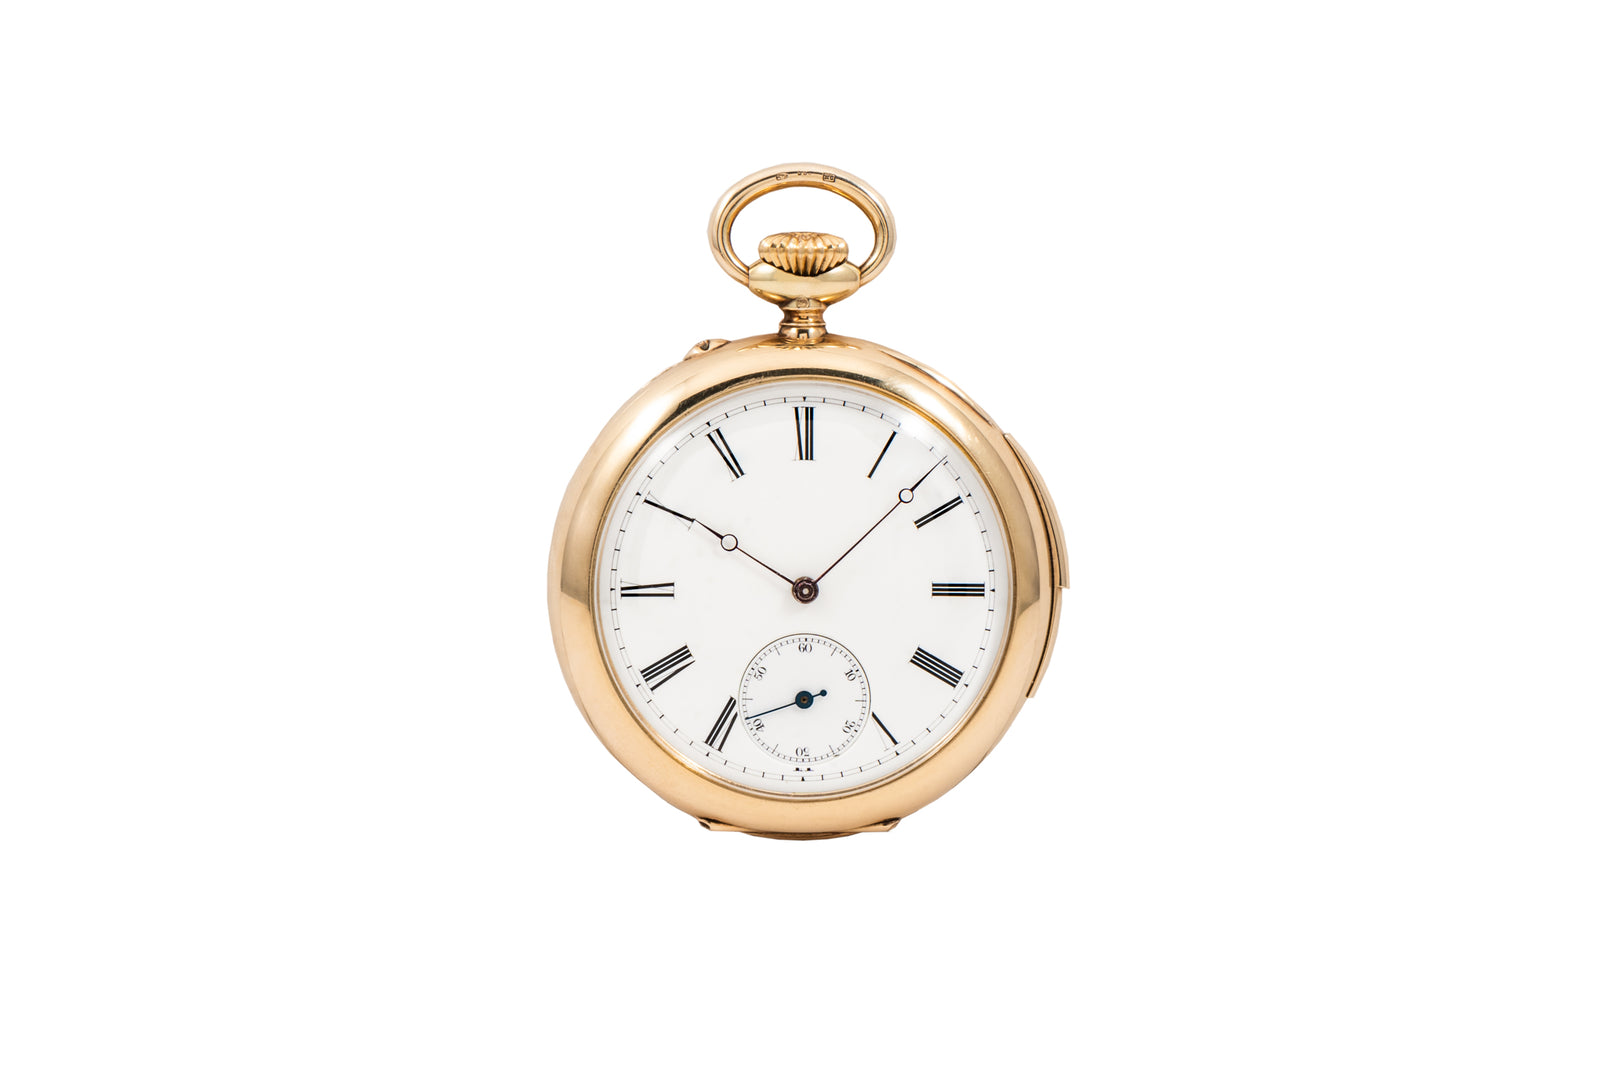 L'Ecole Horologie Minute Repeater Pocketwatch